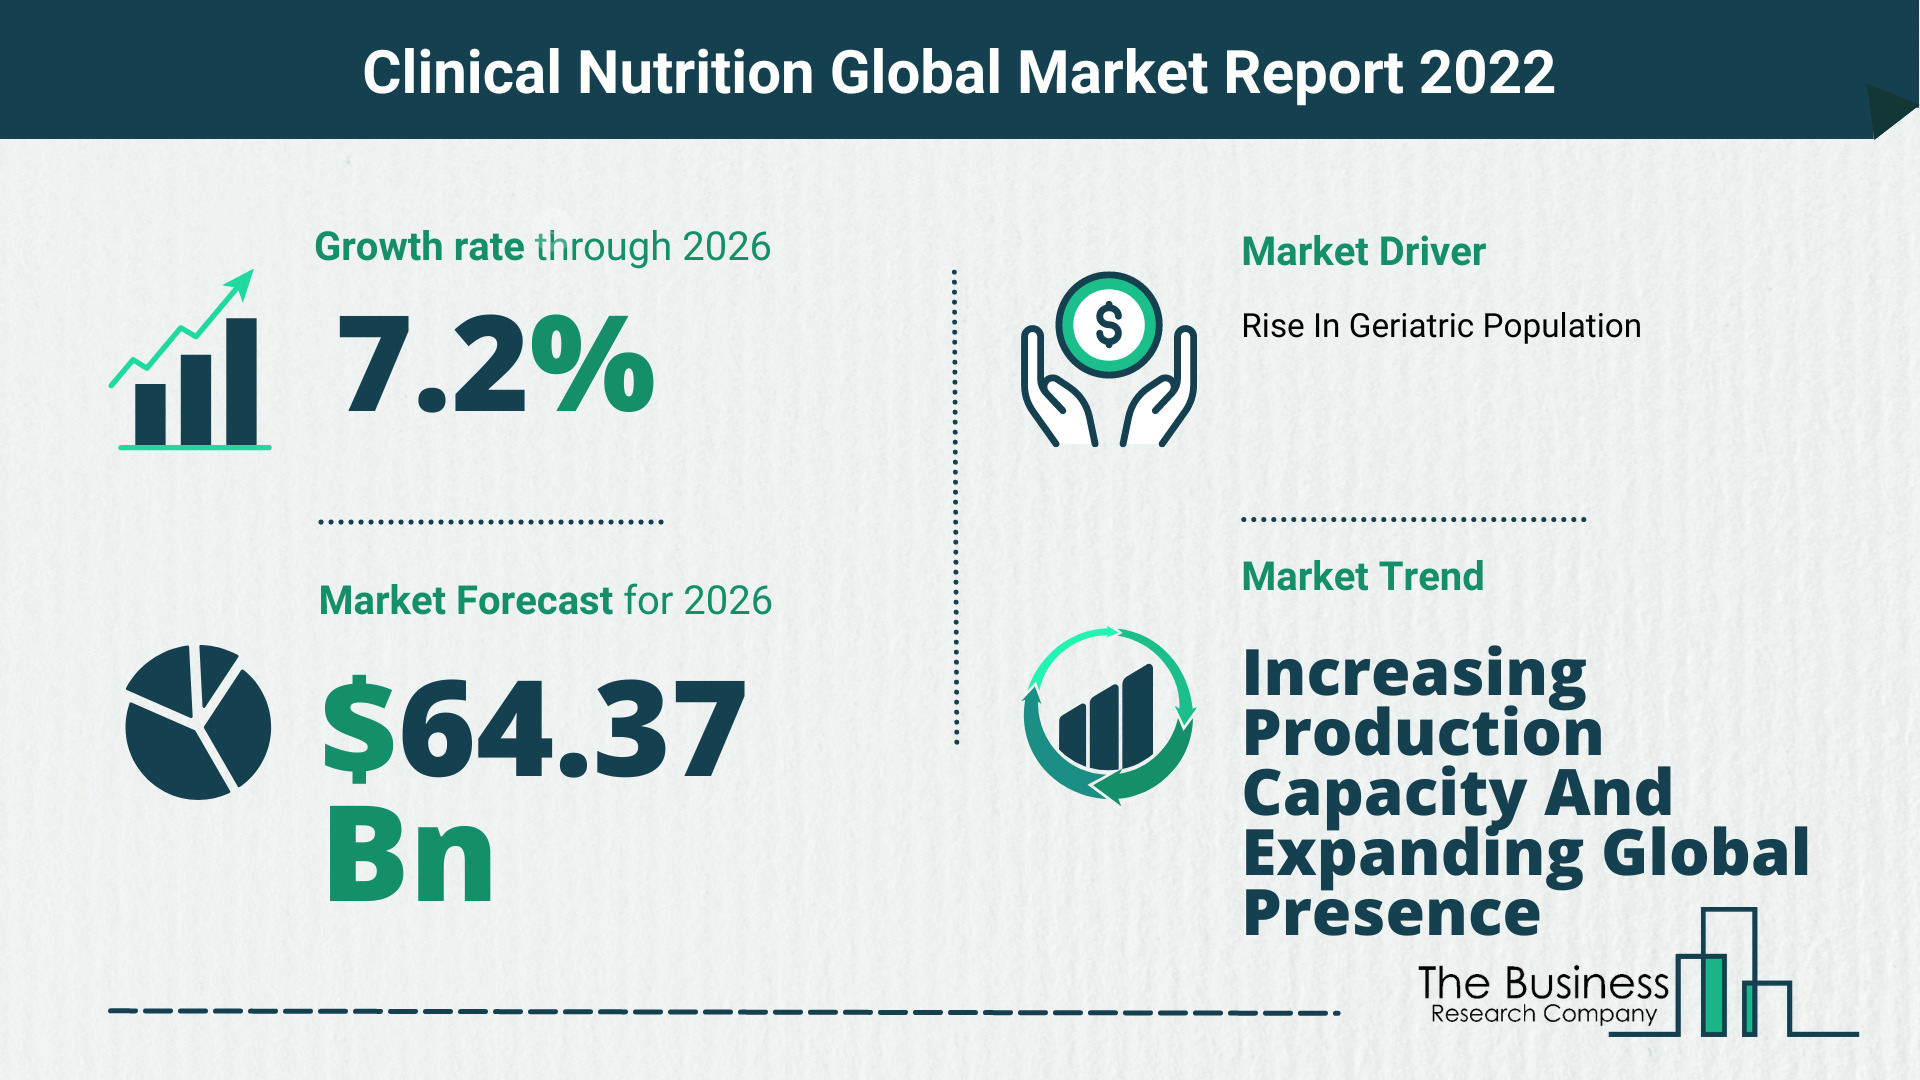 How Will The Clinical Nutrition Market Grow In 2022?